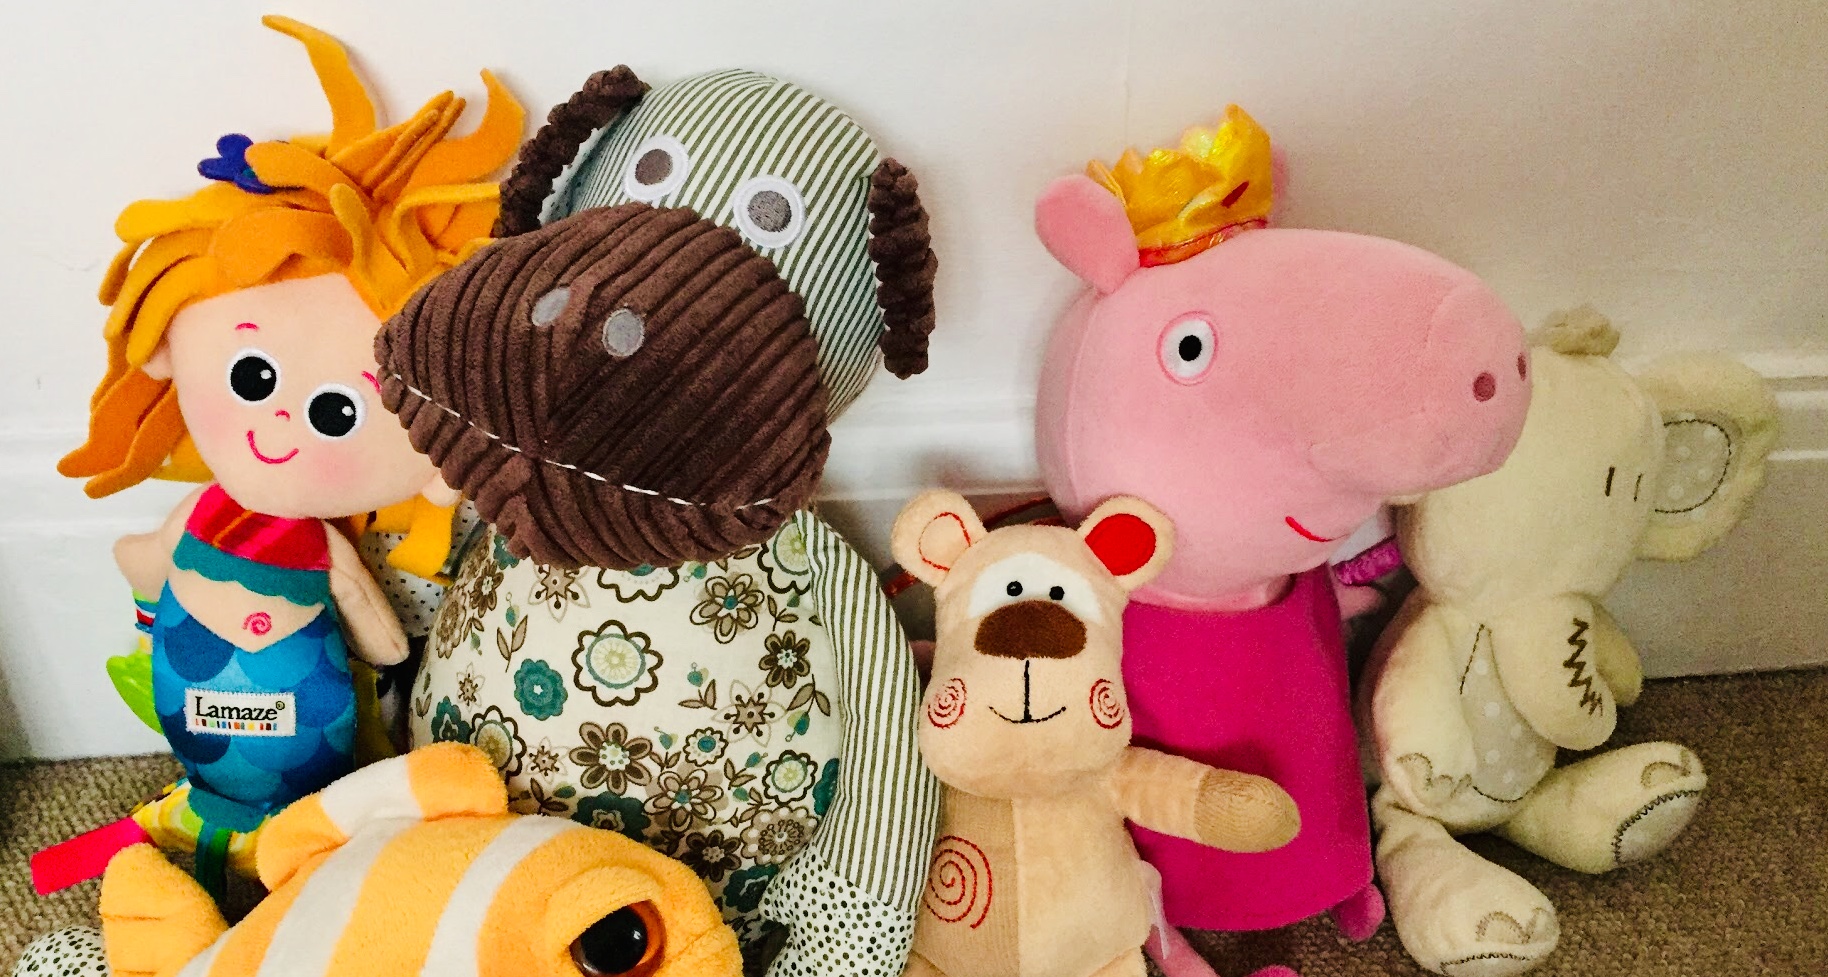 The Perfect Time to Organise Children’s Things